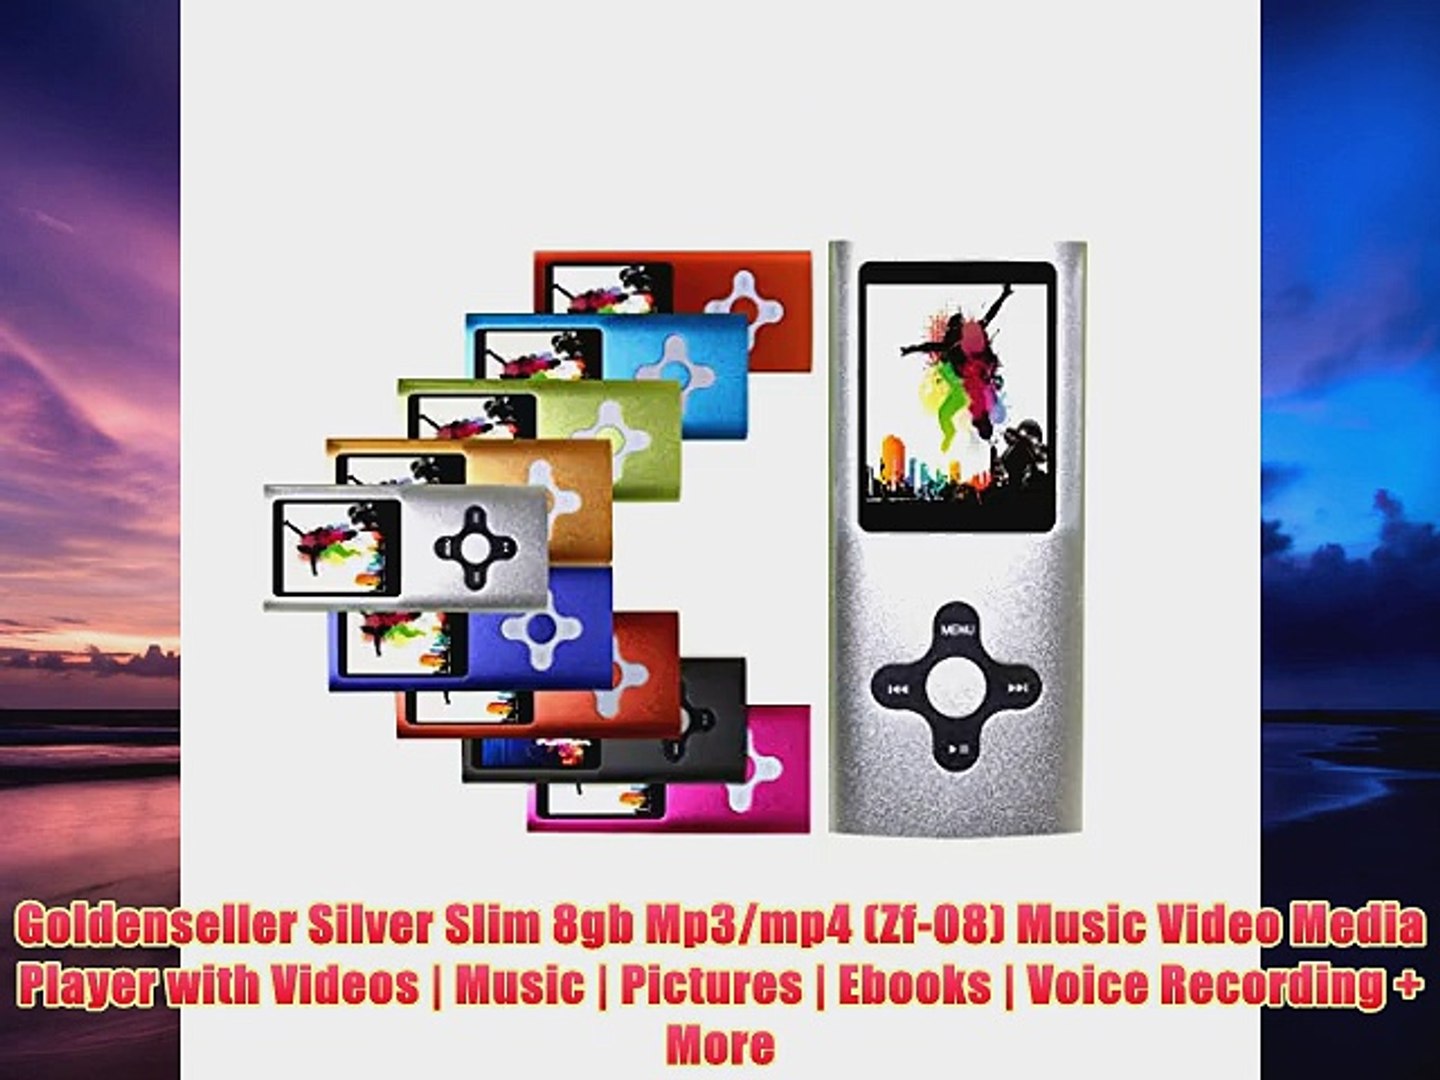 Goldenseller Silver Slim 8gb Mp3mp4 Zf08 Music Video Media Player with Videos Music Pictures Ebooks 